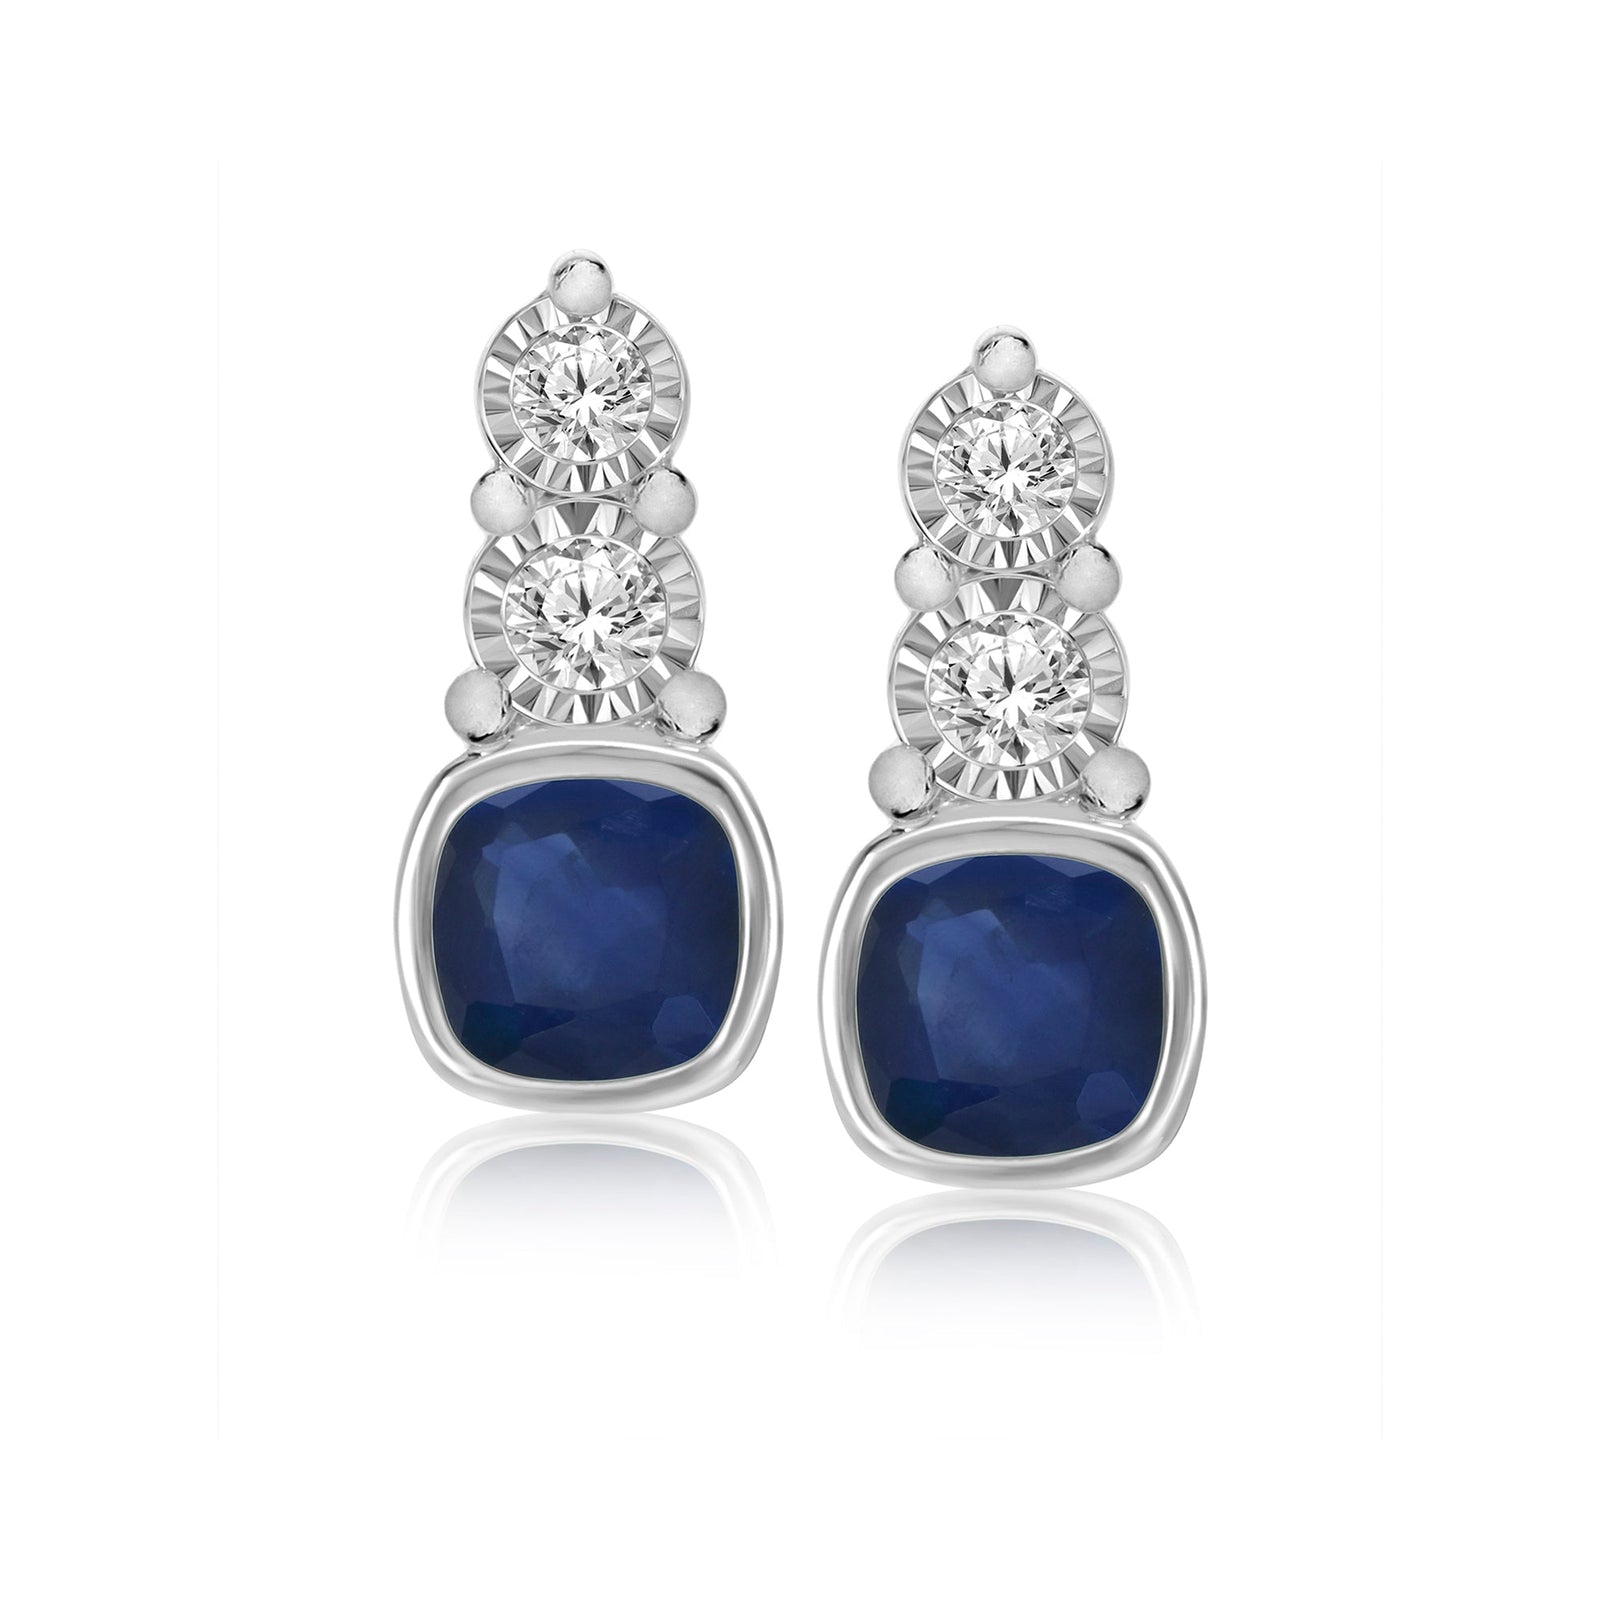 9ct white gold 4mm cushion shape sapphire & miracle plate diamond studs earrings 0.06ct